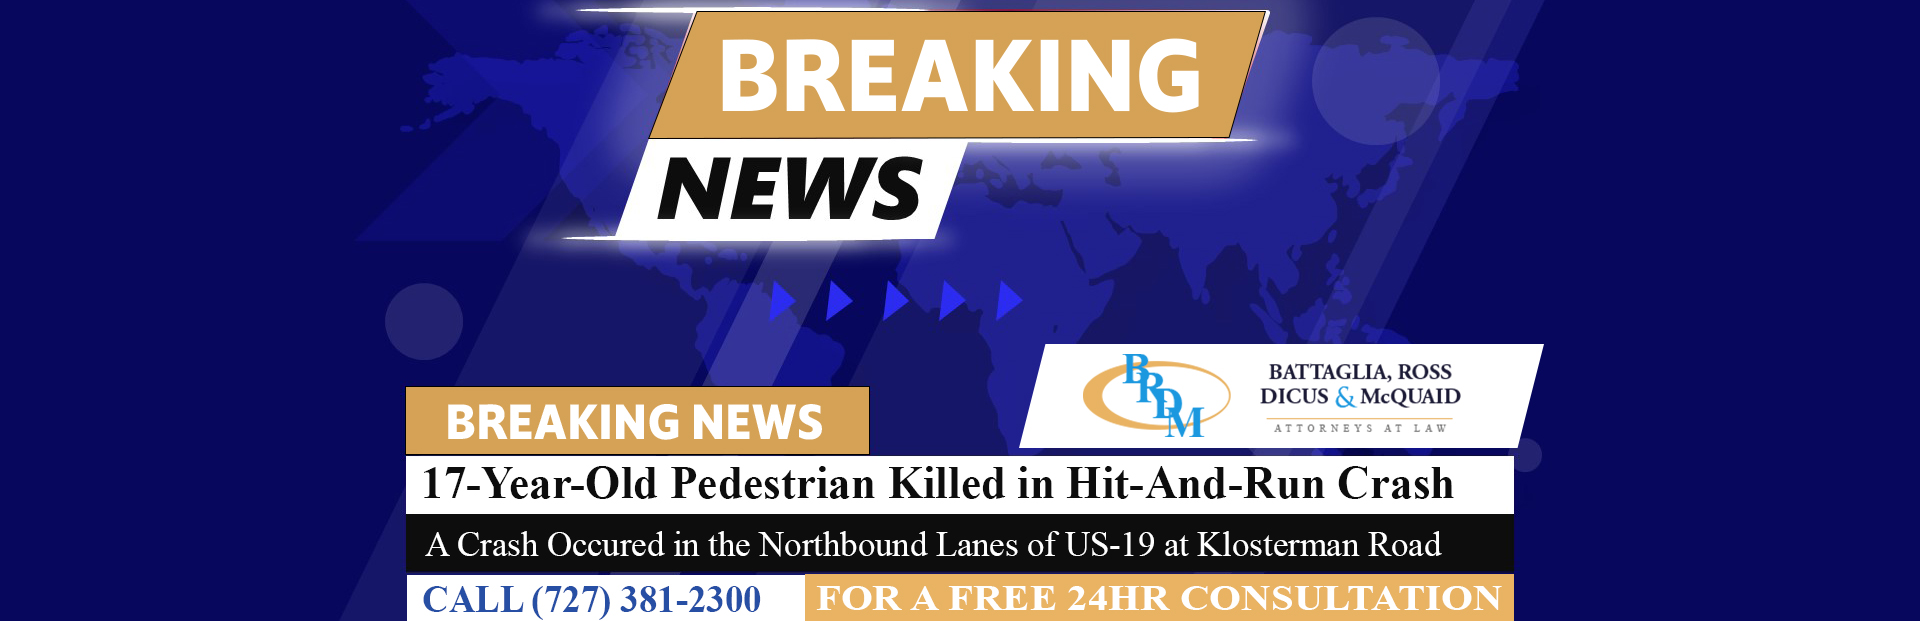 [03-30-23] 17-Year-Old Pedestrian Killed in Hit-And-Run Crash on US-19 Near Klosterman Road